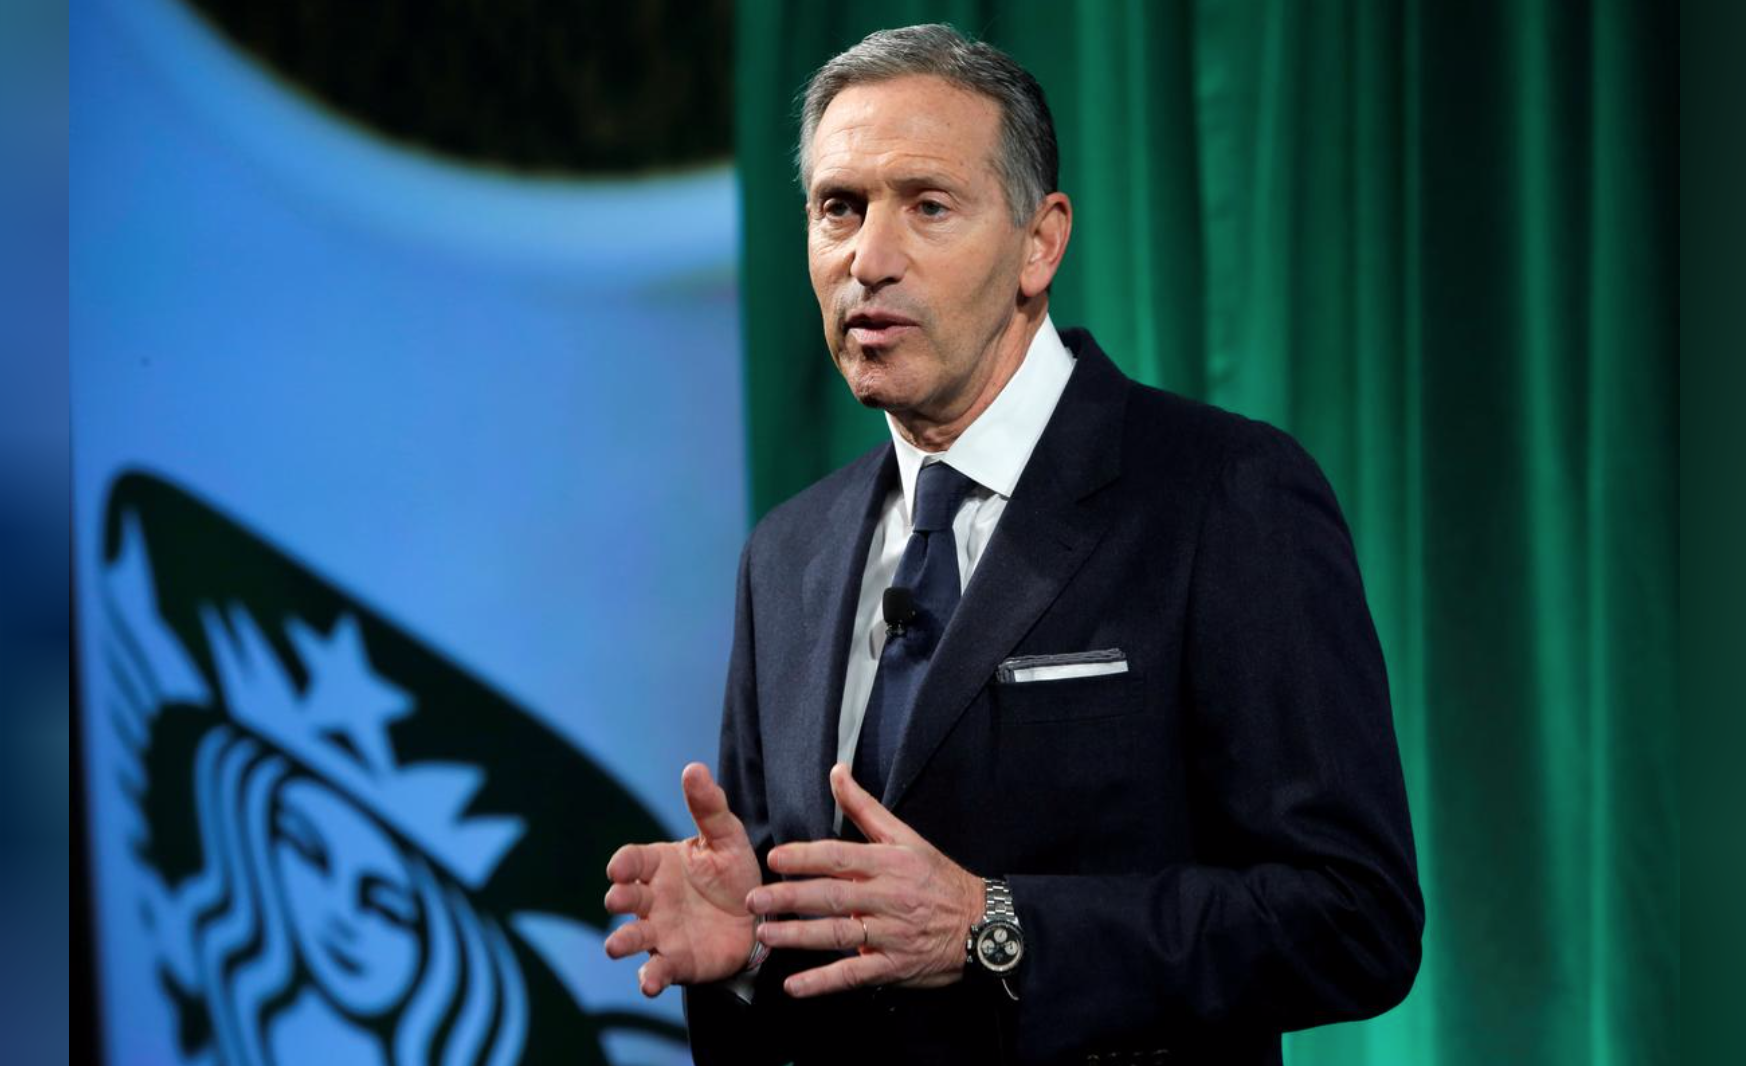 Former Starbucks CEO Considers Running For President As Independent